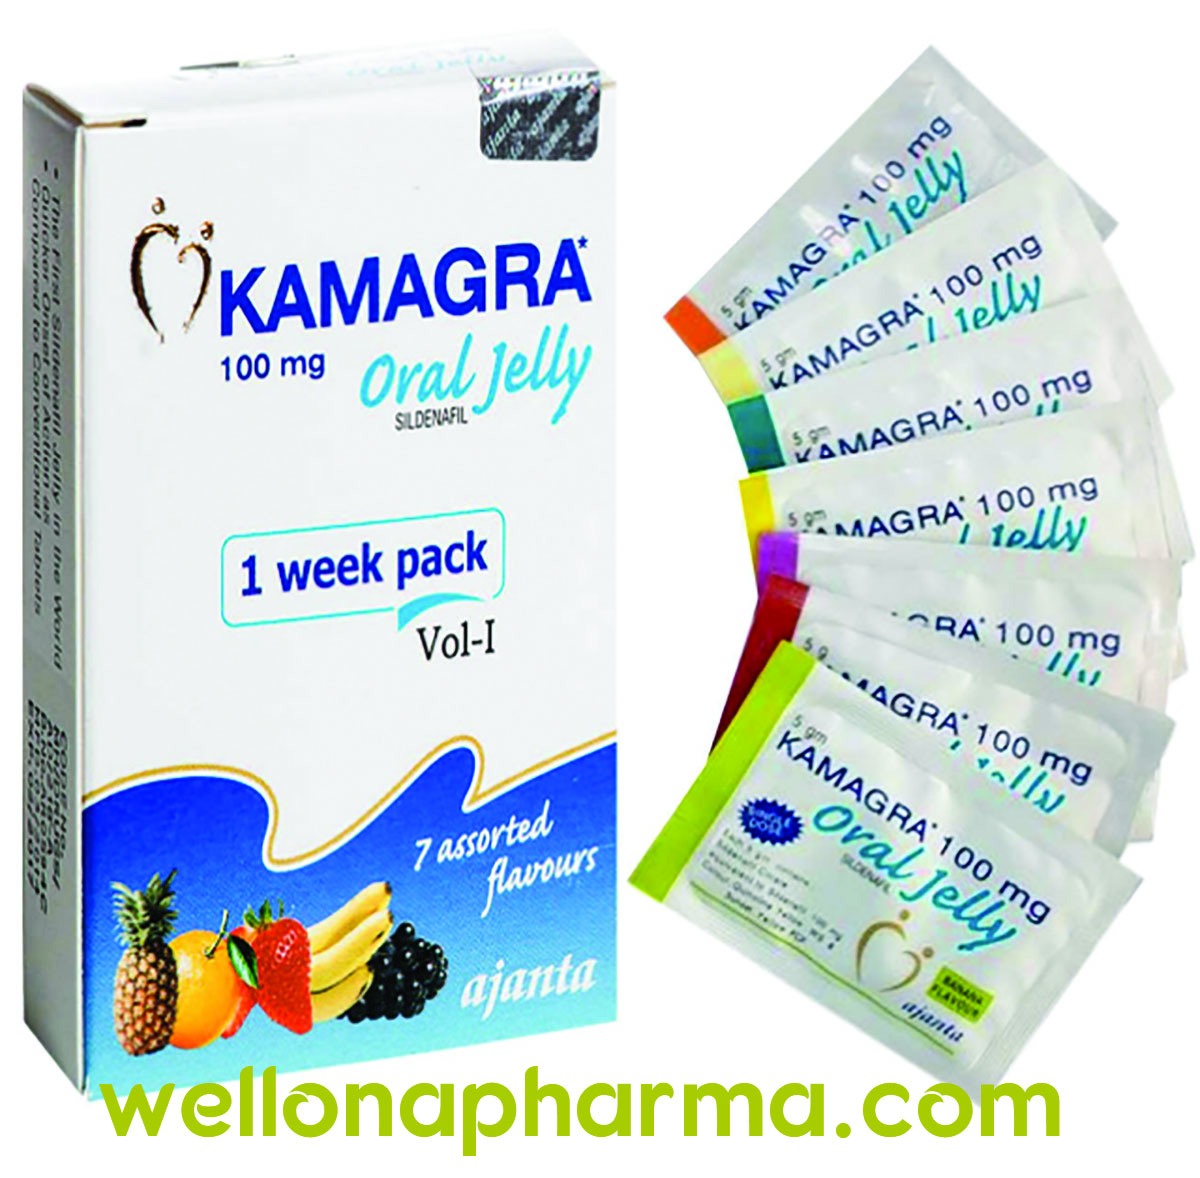 Kamagra 100 mg is a medication primarily used to treat